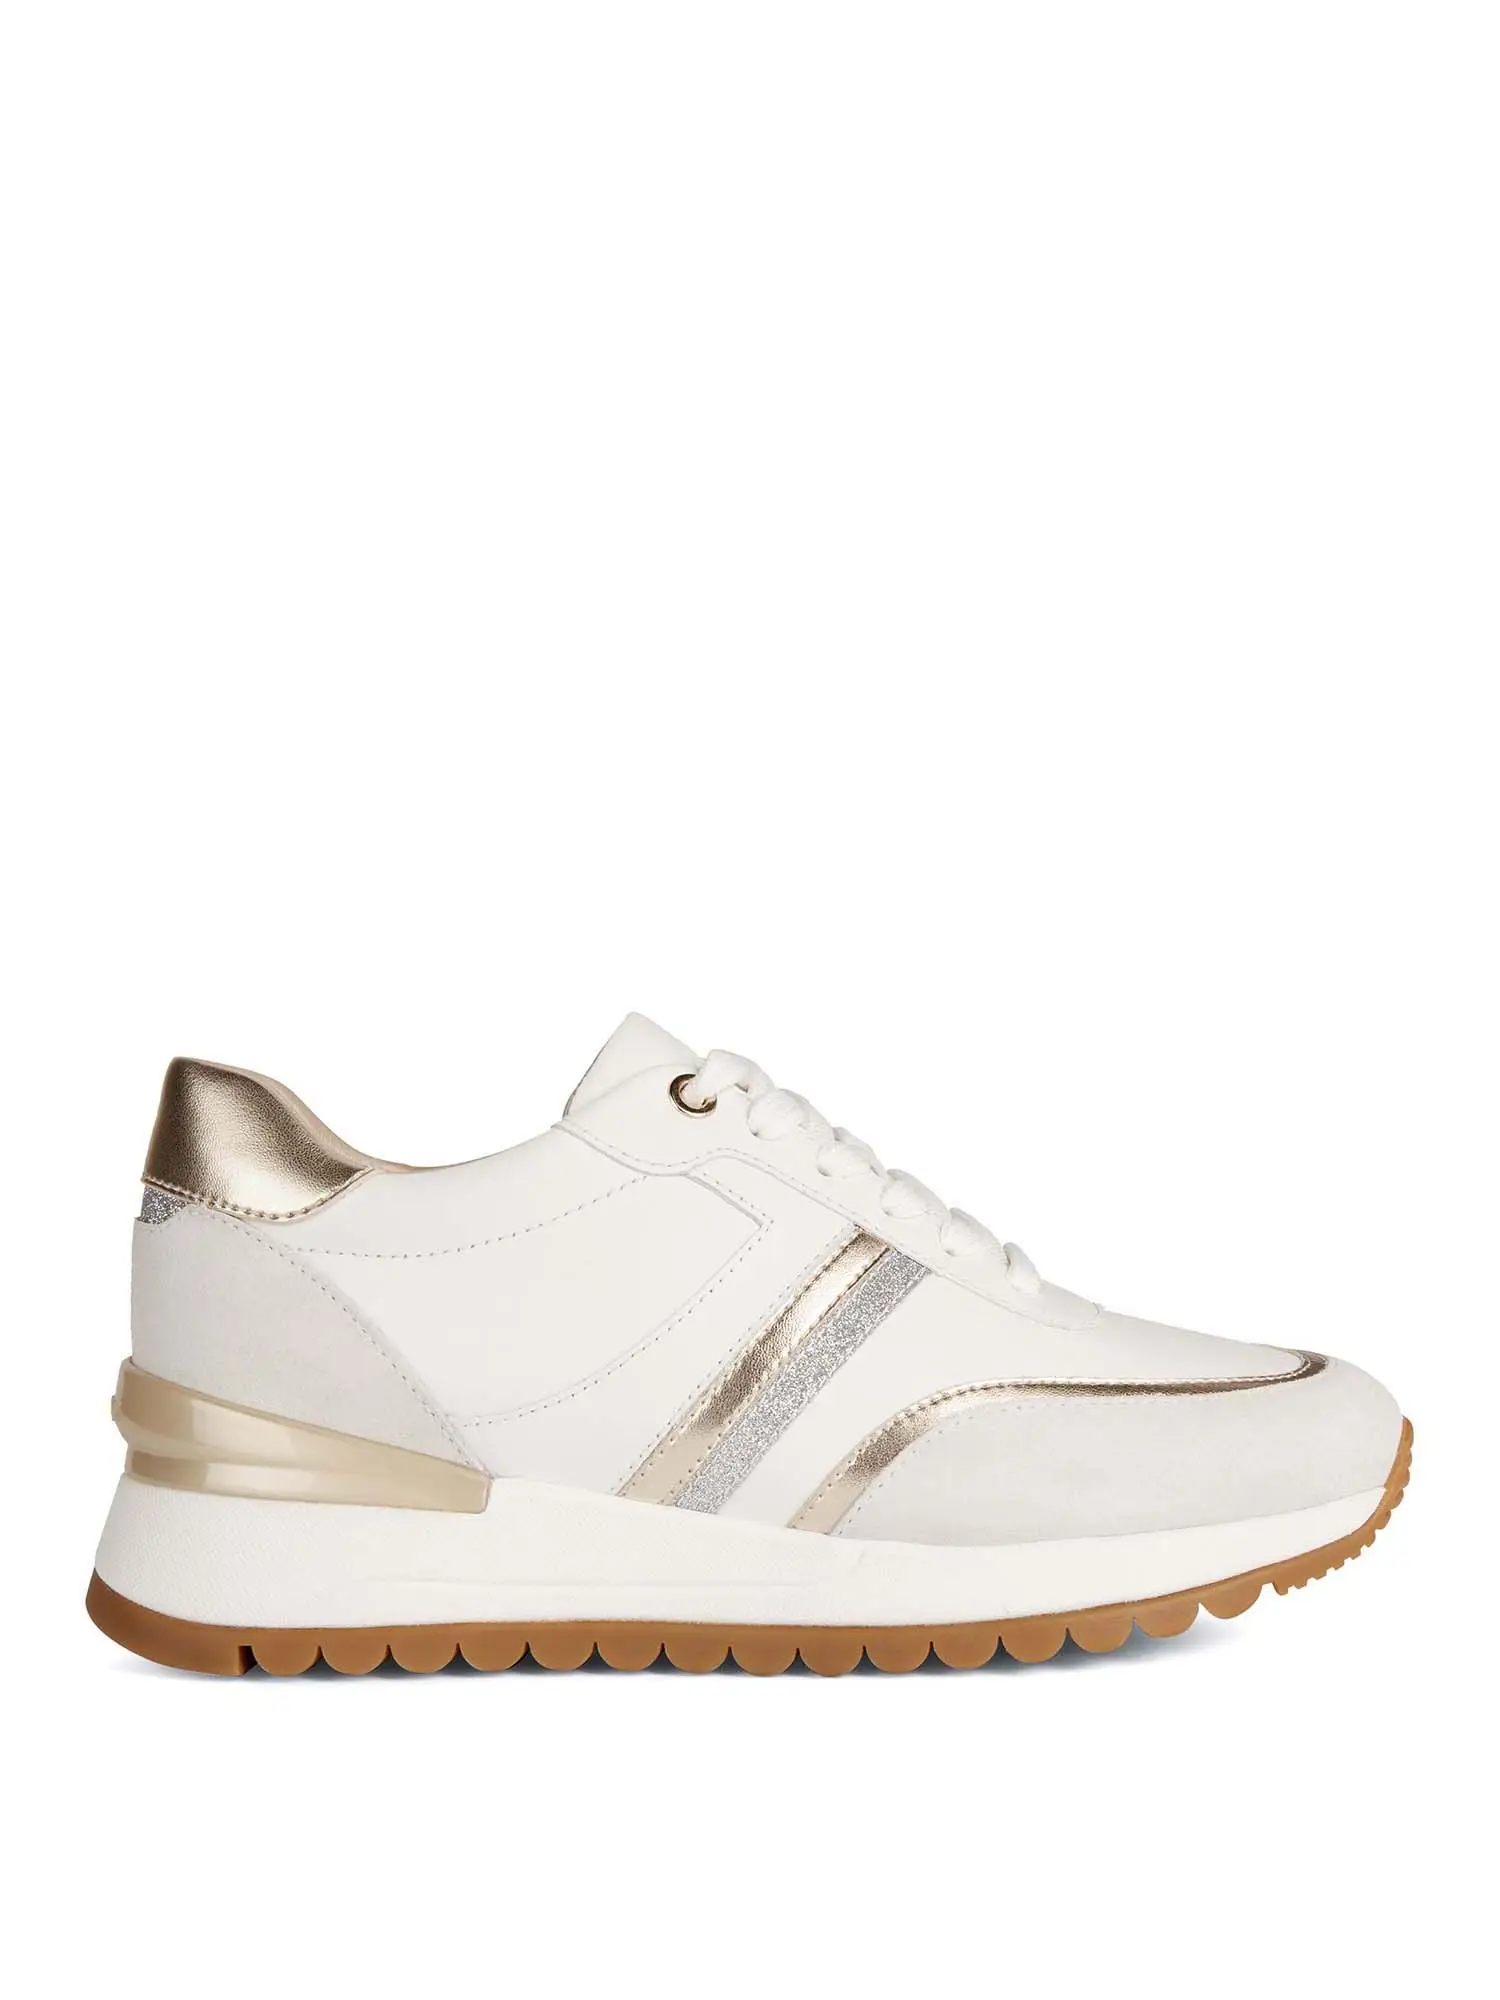 SNEAKERS DONNA - GEOX - D3500A 08522 - BIANCO, 38